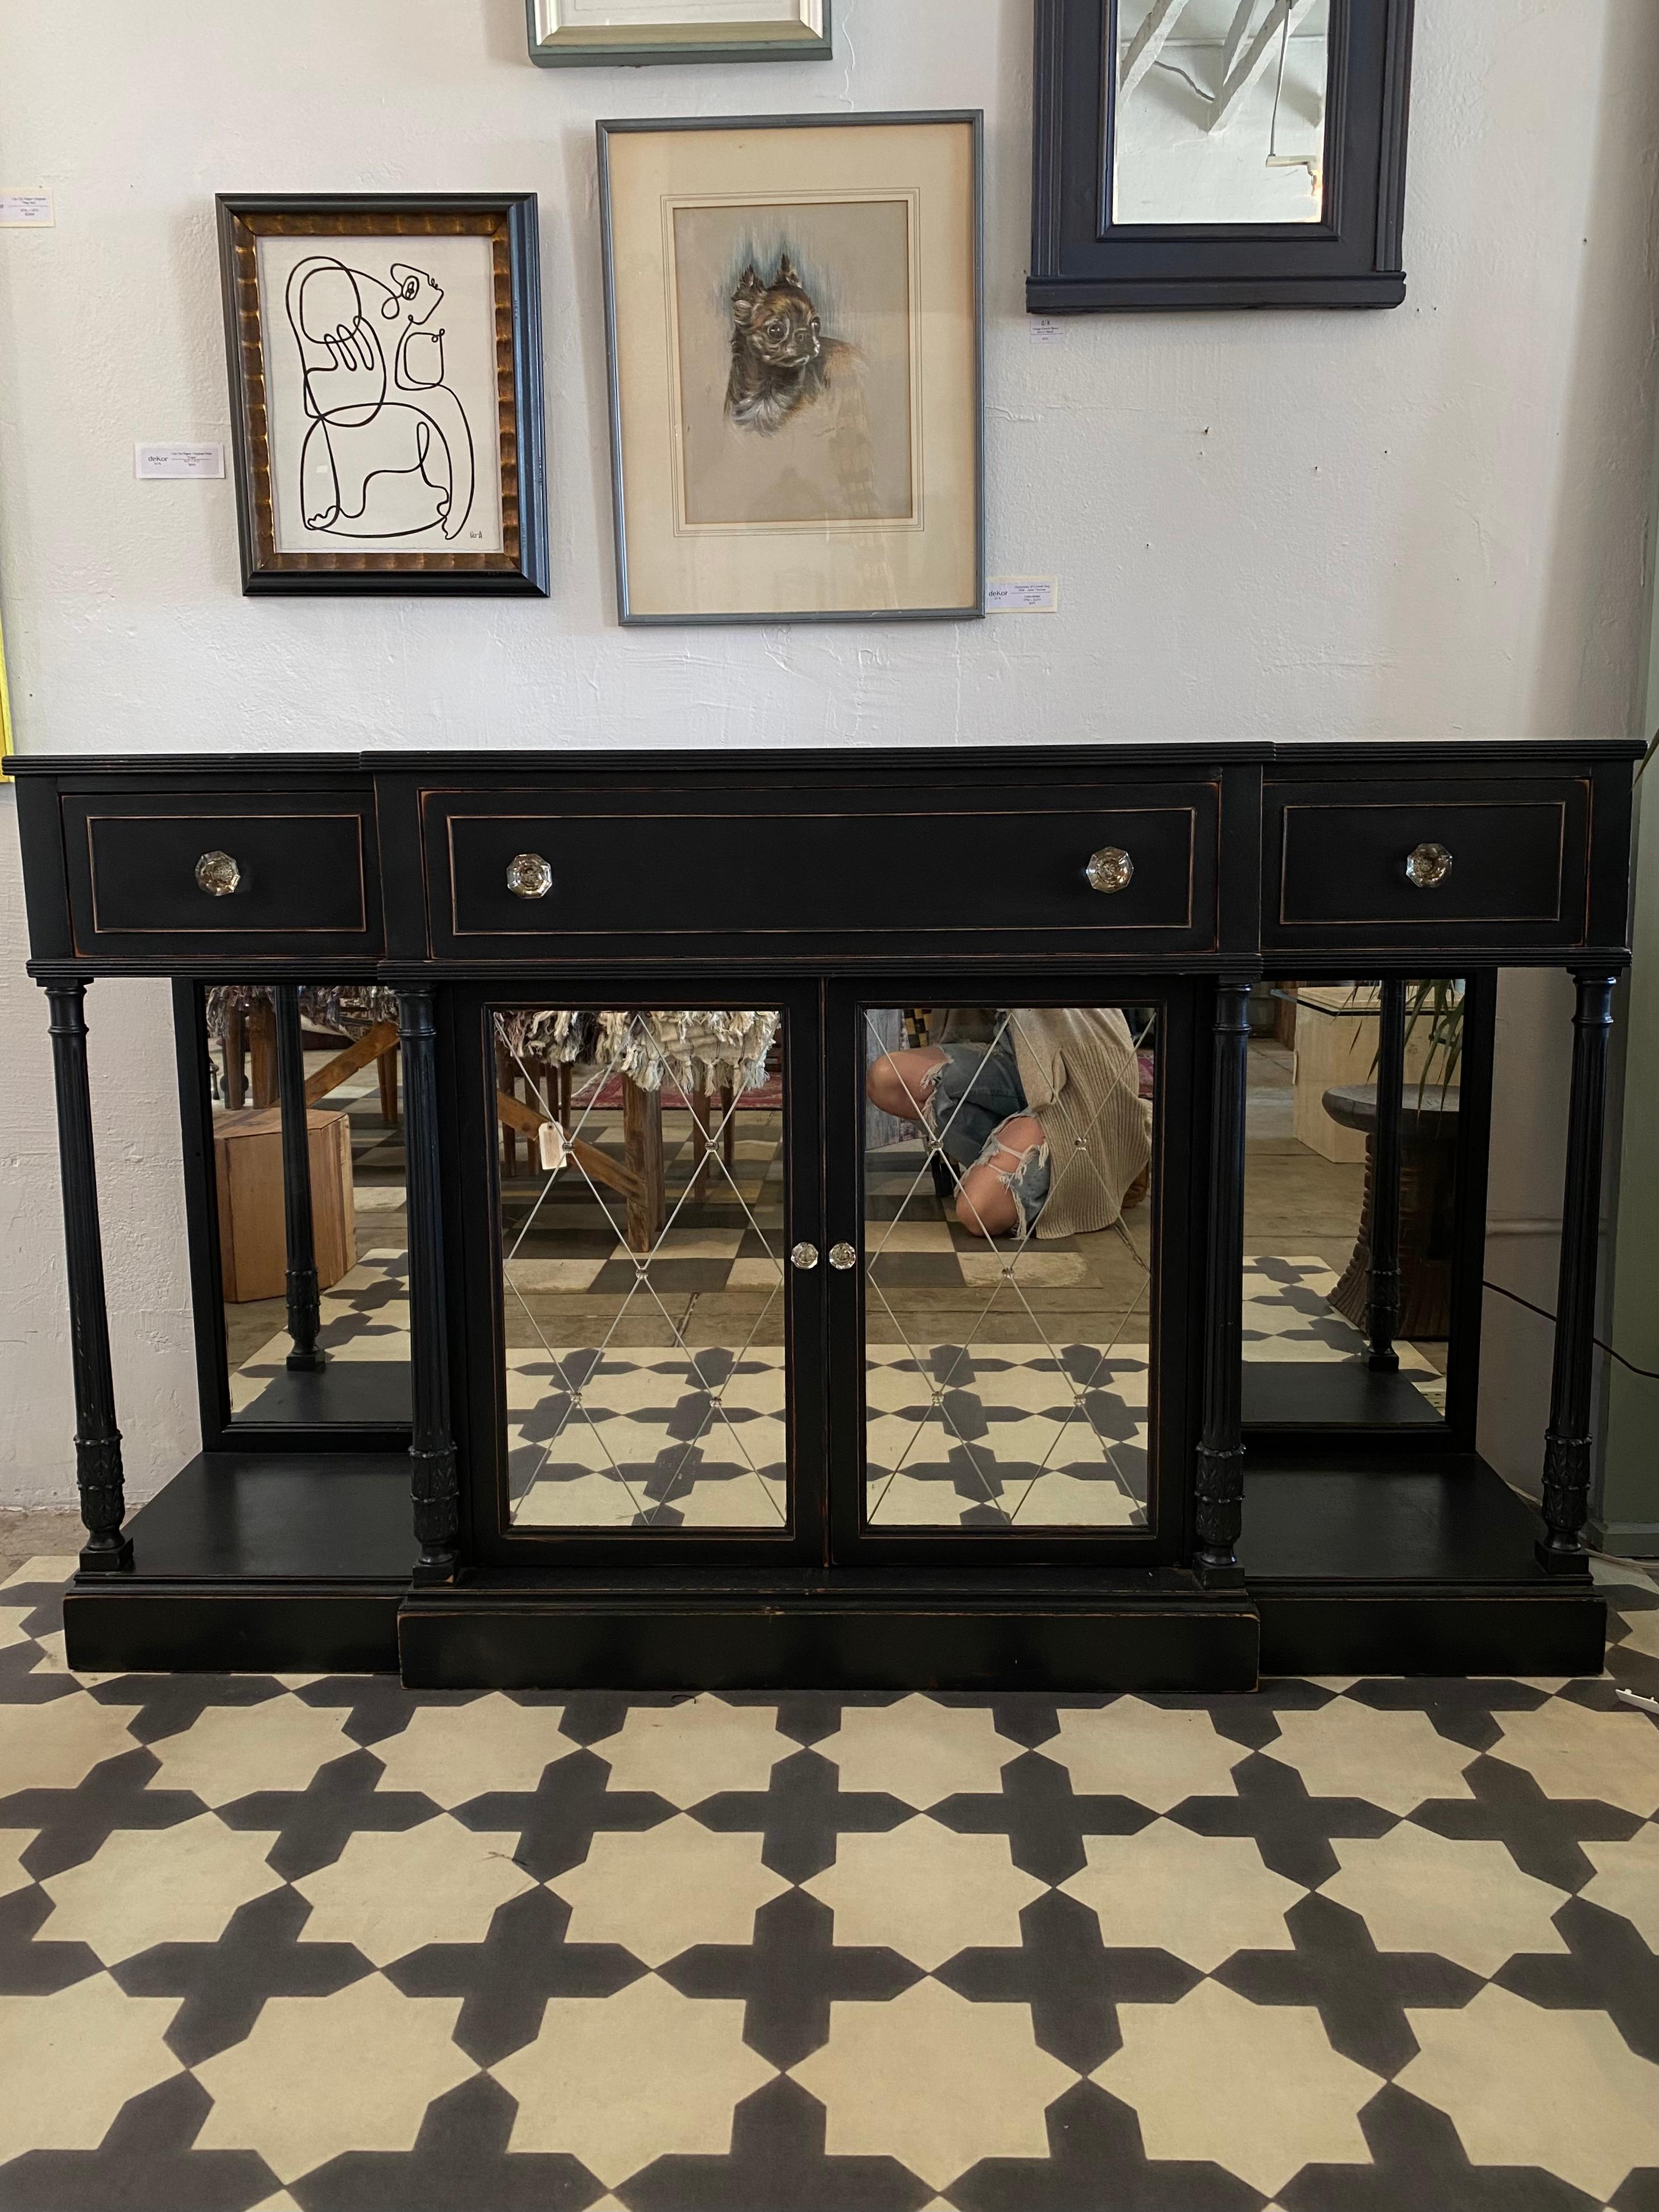 Vintage Black Bar Cabinet with mirrored detailing. This piece is in outstanding condition considering it's age with no structural issues.

Dimensions are 62